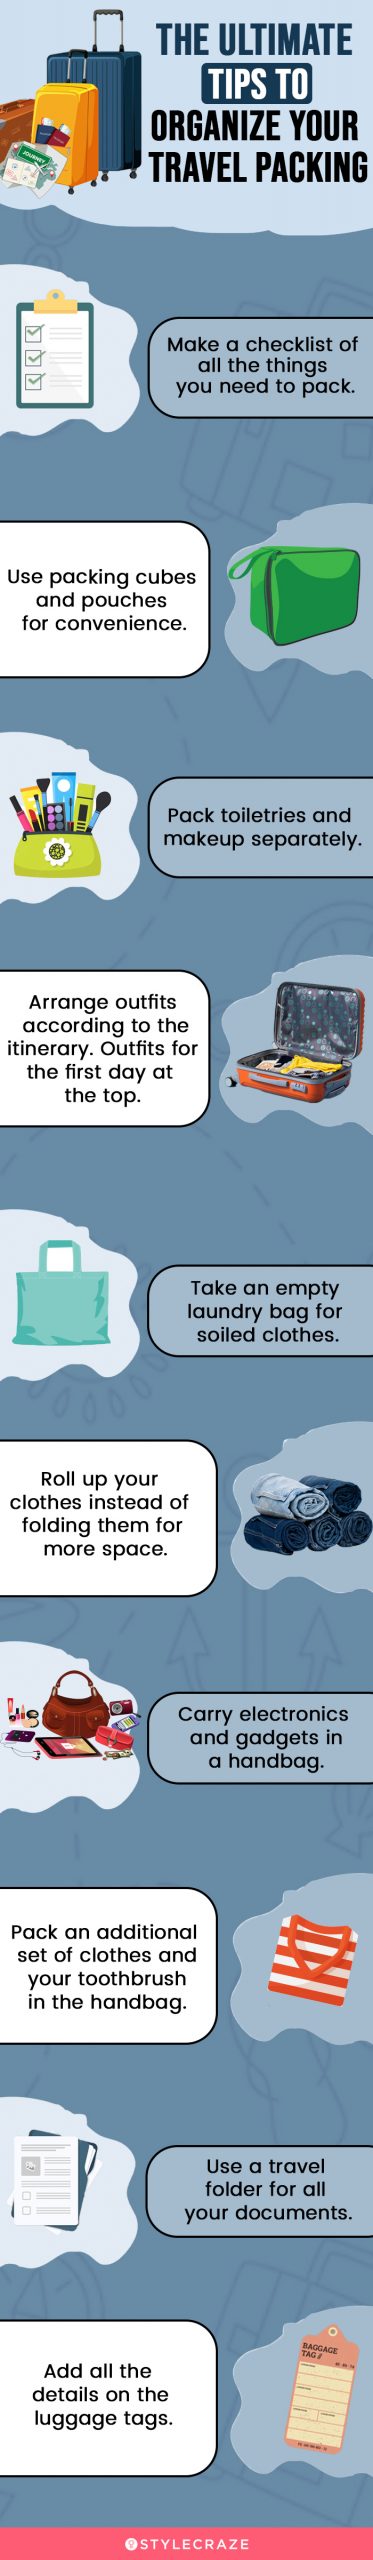 the ultimate tips to organize your travel packing [infographic]